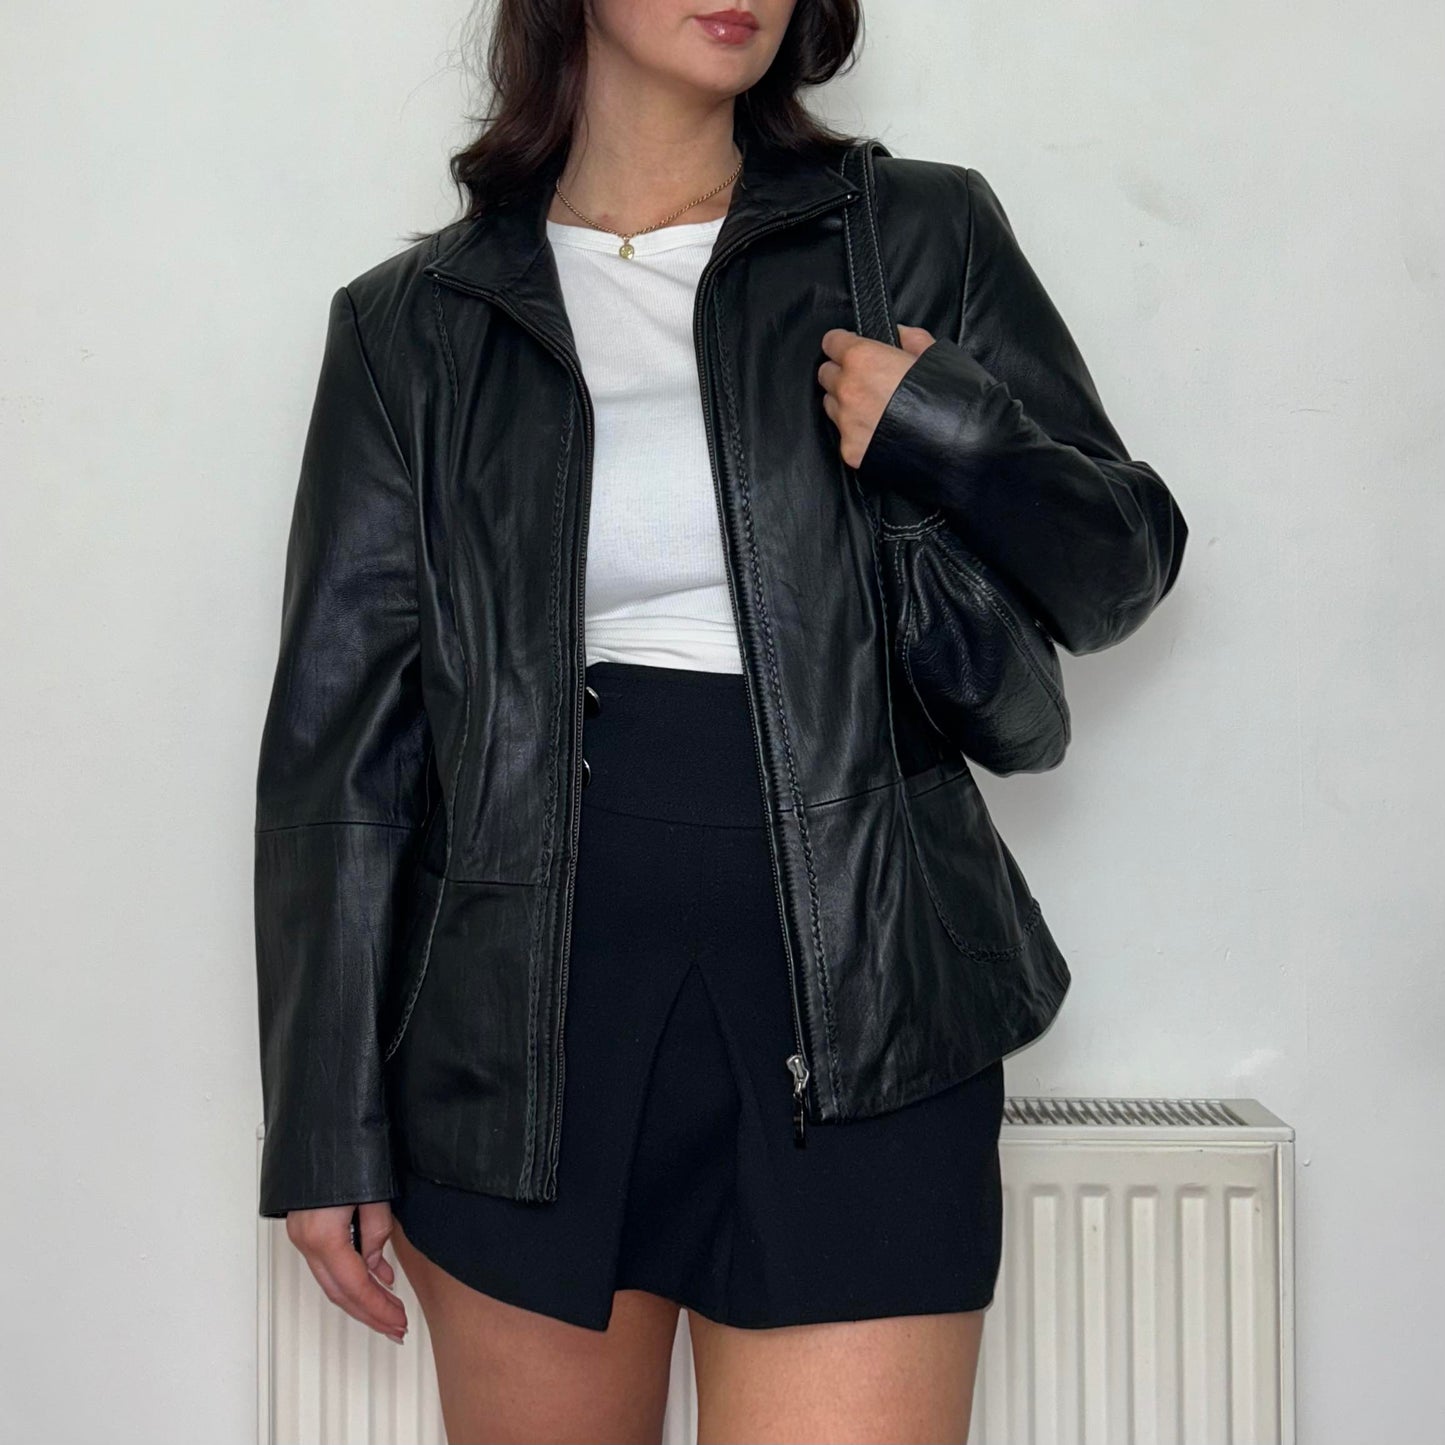 close up of black leather vintage bomber jacket shown on a model wearing a white top and black mini skirt